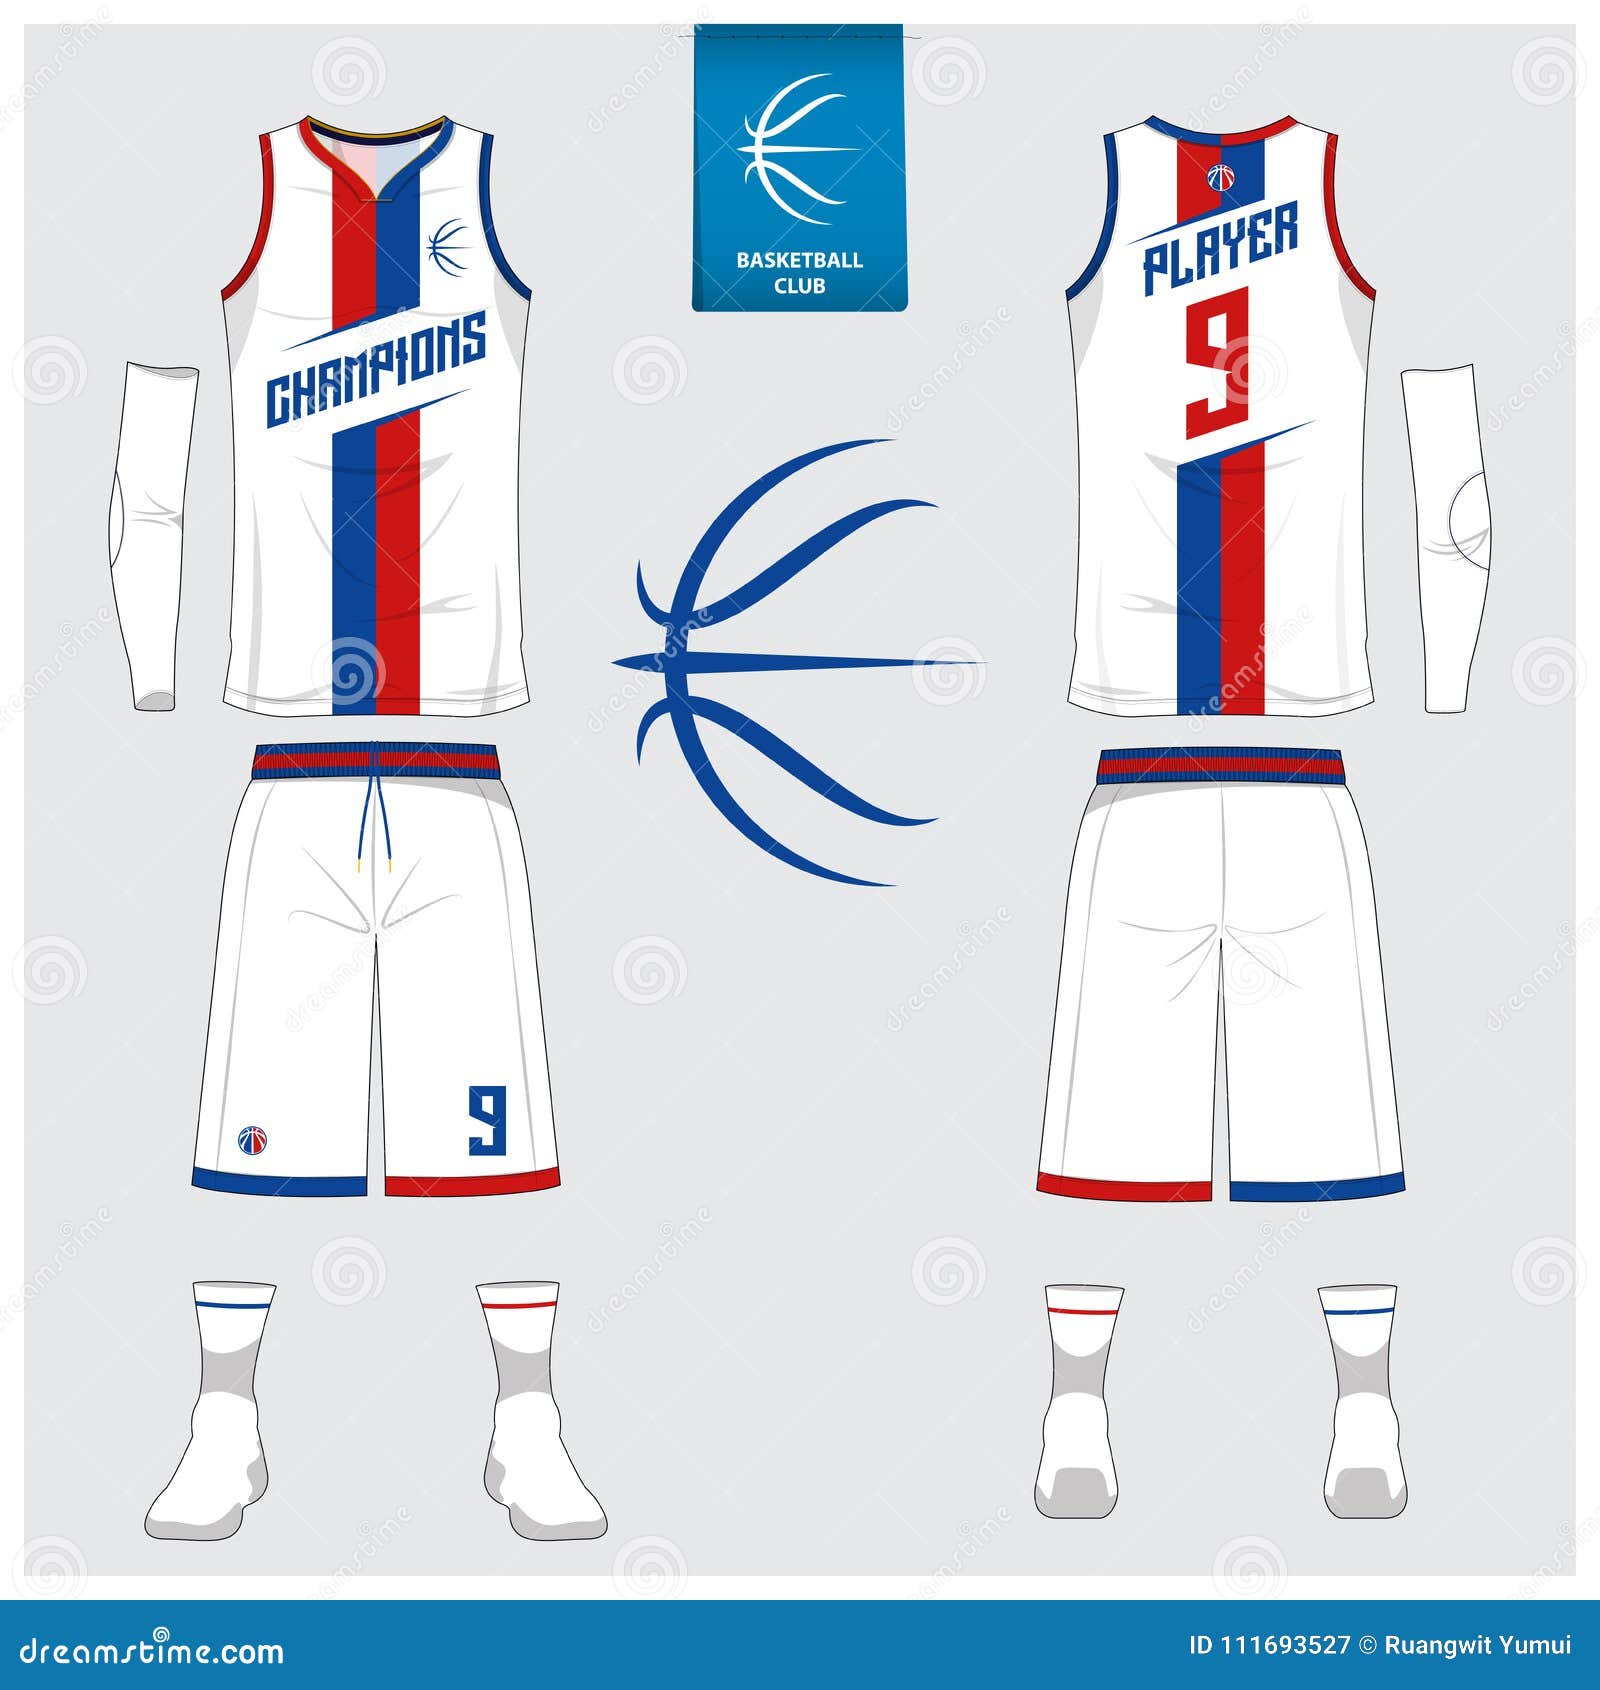 basketball jersey, shorts, socks template for basketball club. front and back view sport uniform. tank top t-shirt mock up.